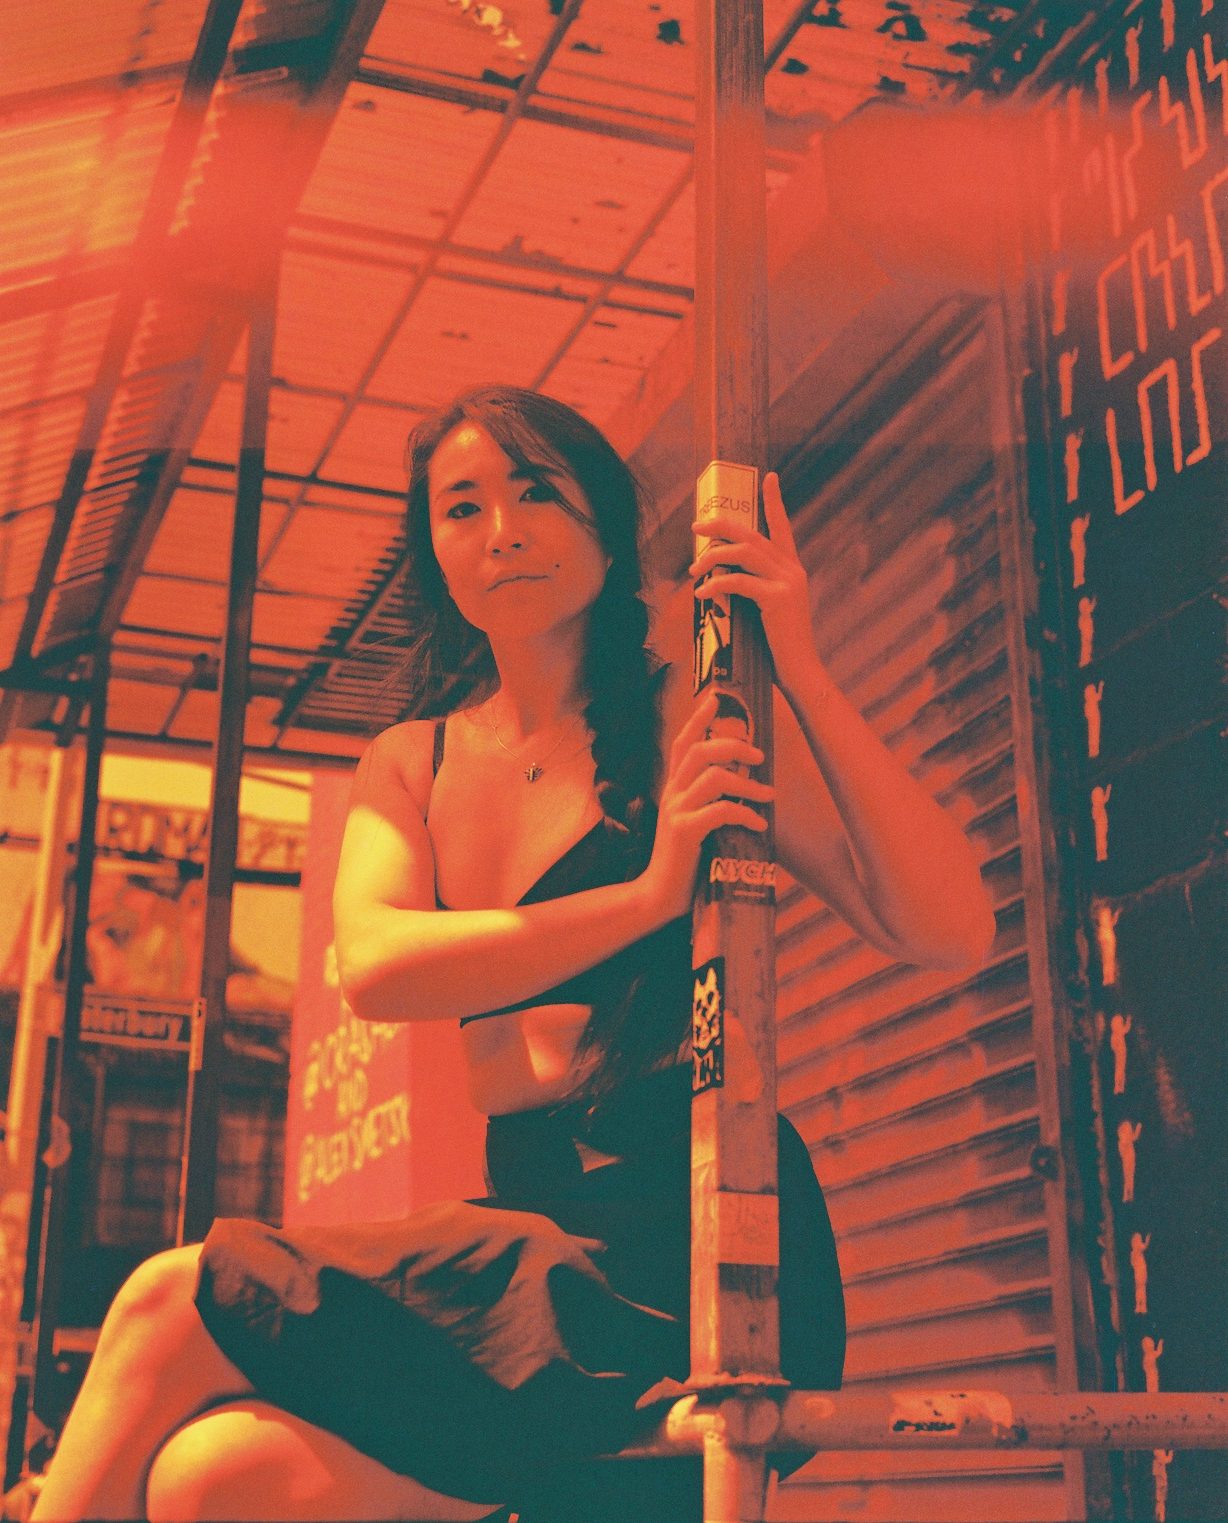 How to Get the Redscale Look In-Camera Without Post-Production